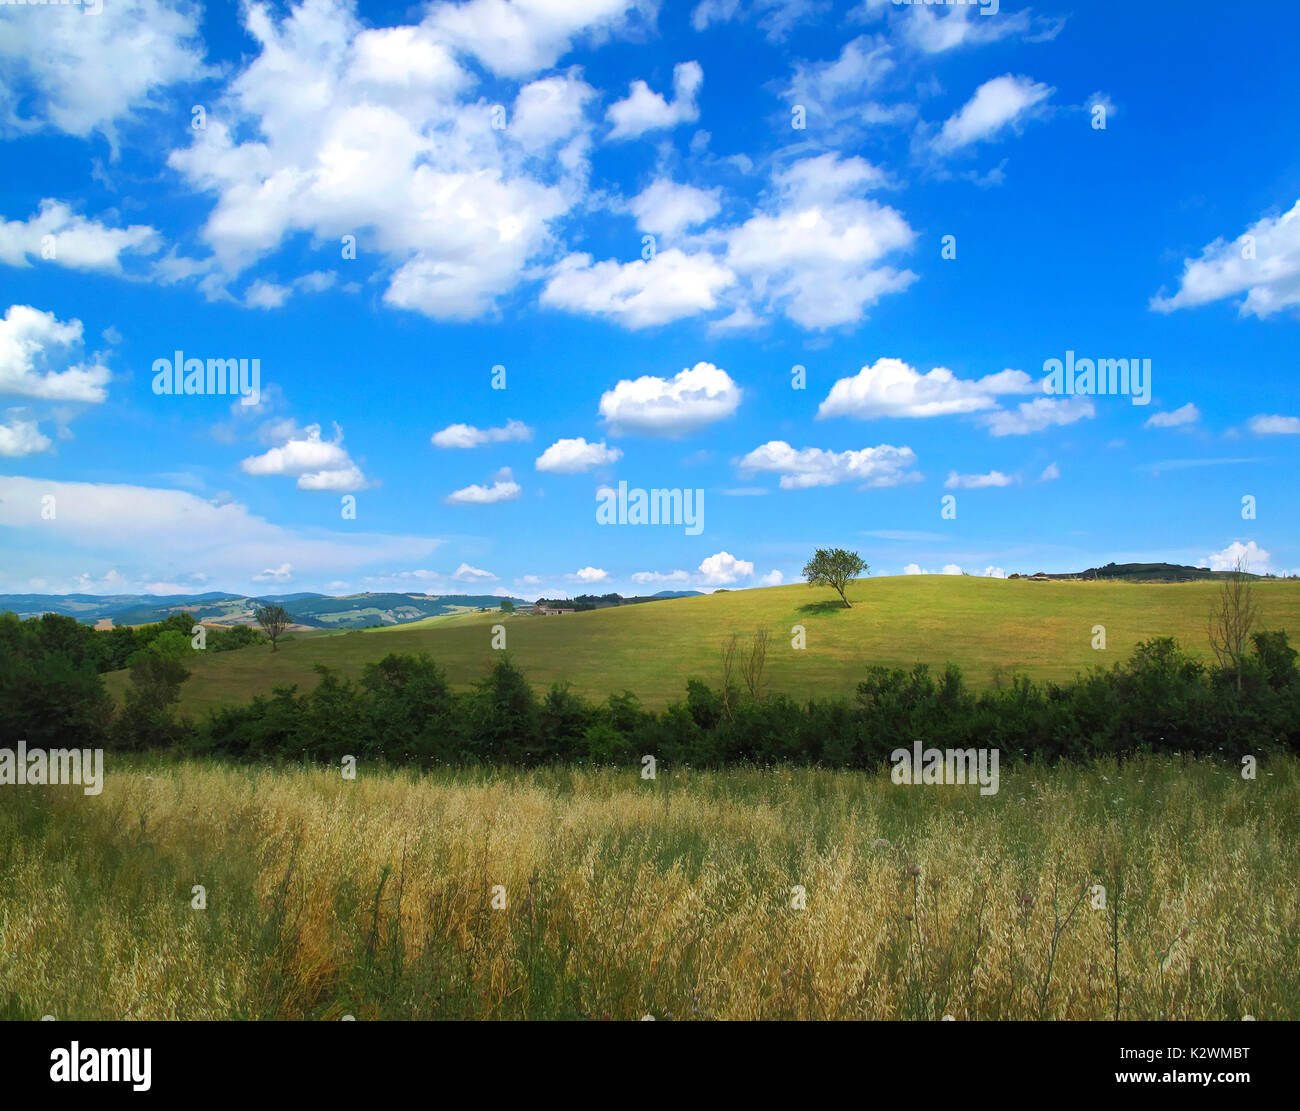 Beautiful Tuscan Landscape with One Tree amidst puffy white clouds on a hill top, The morning light sets this scene with rich saturated color Stock Photo